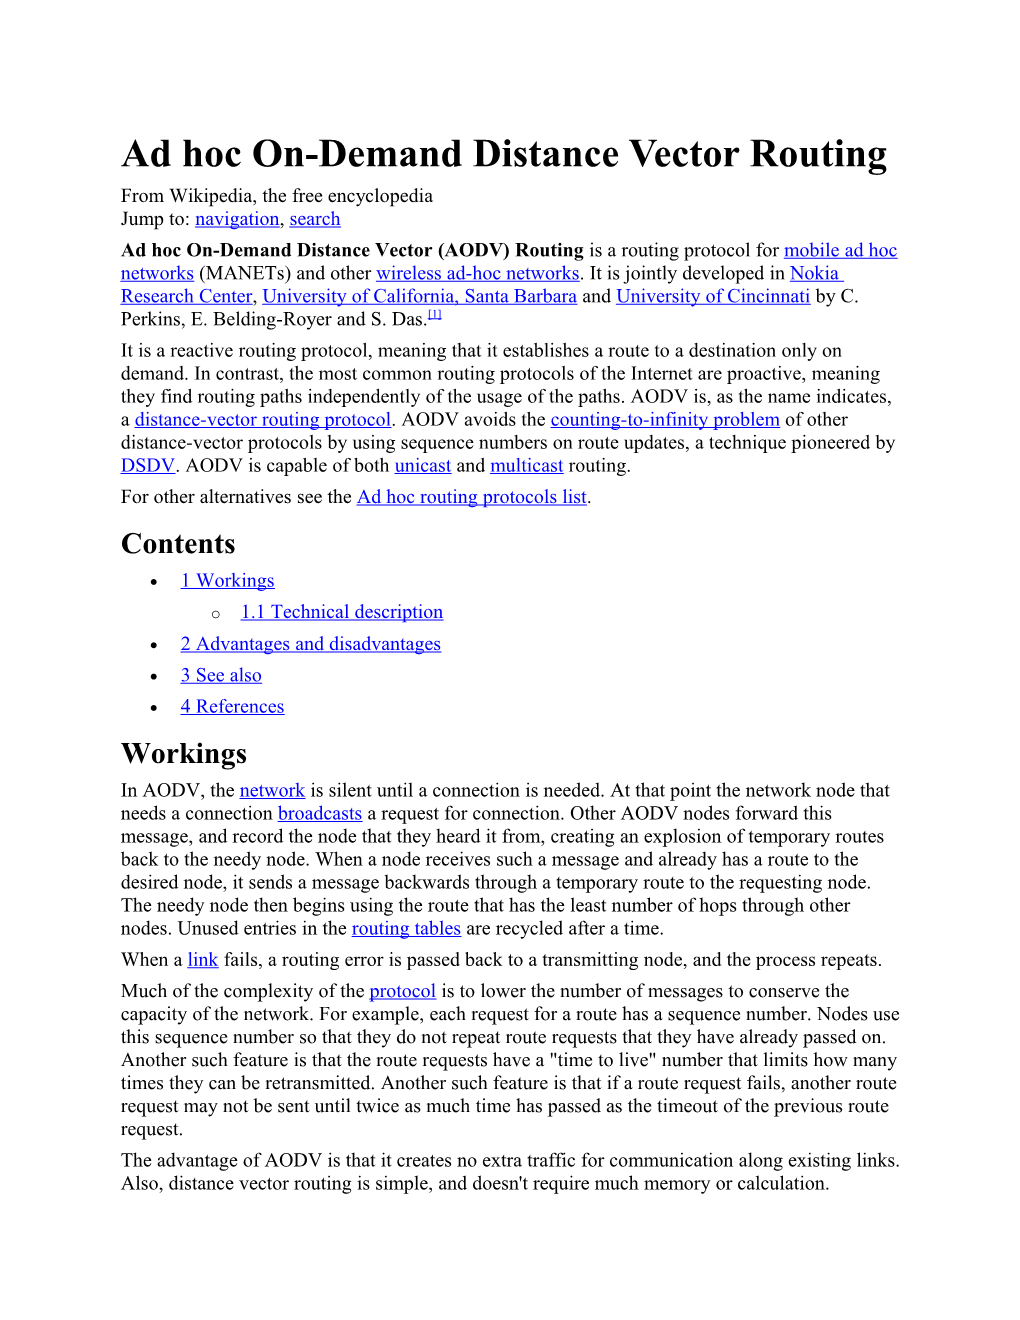 Ad Hoc On-Demand Distance Vector Routing